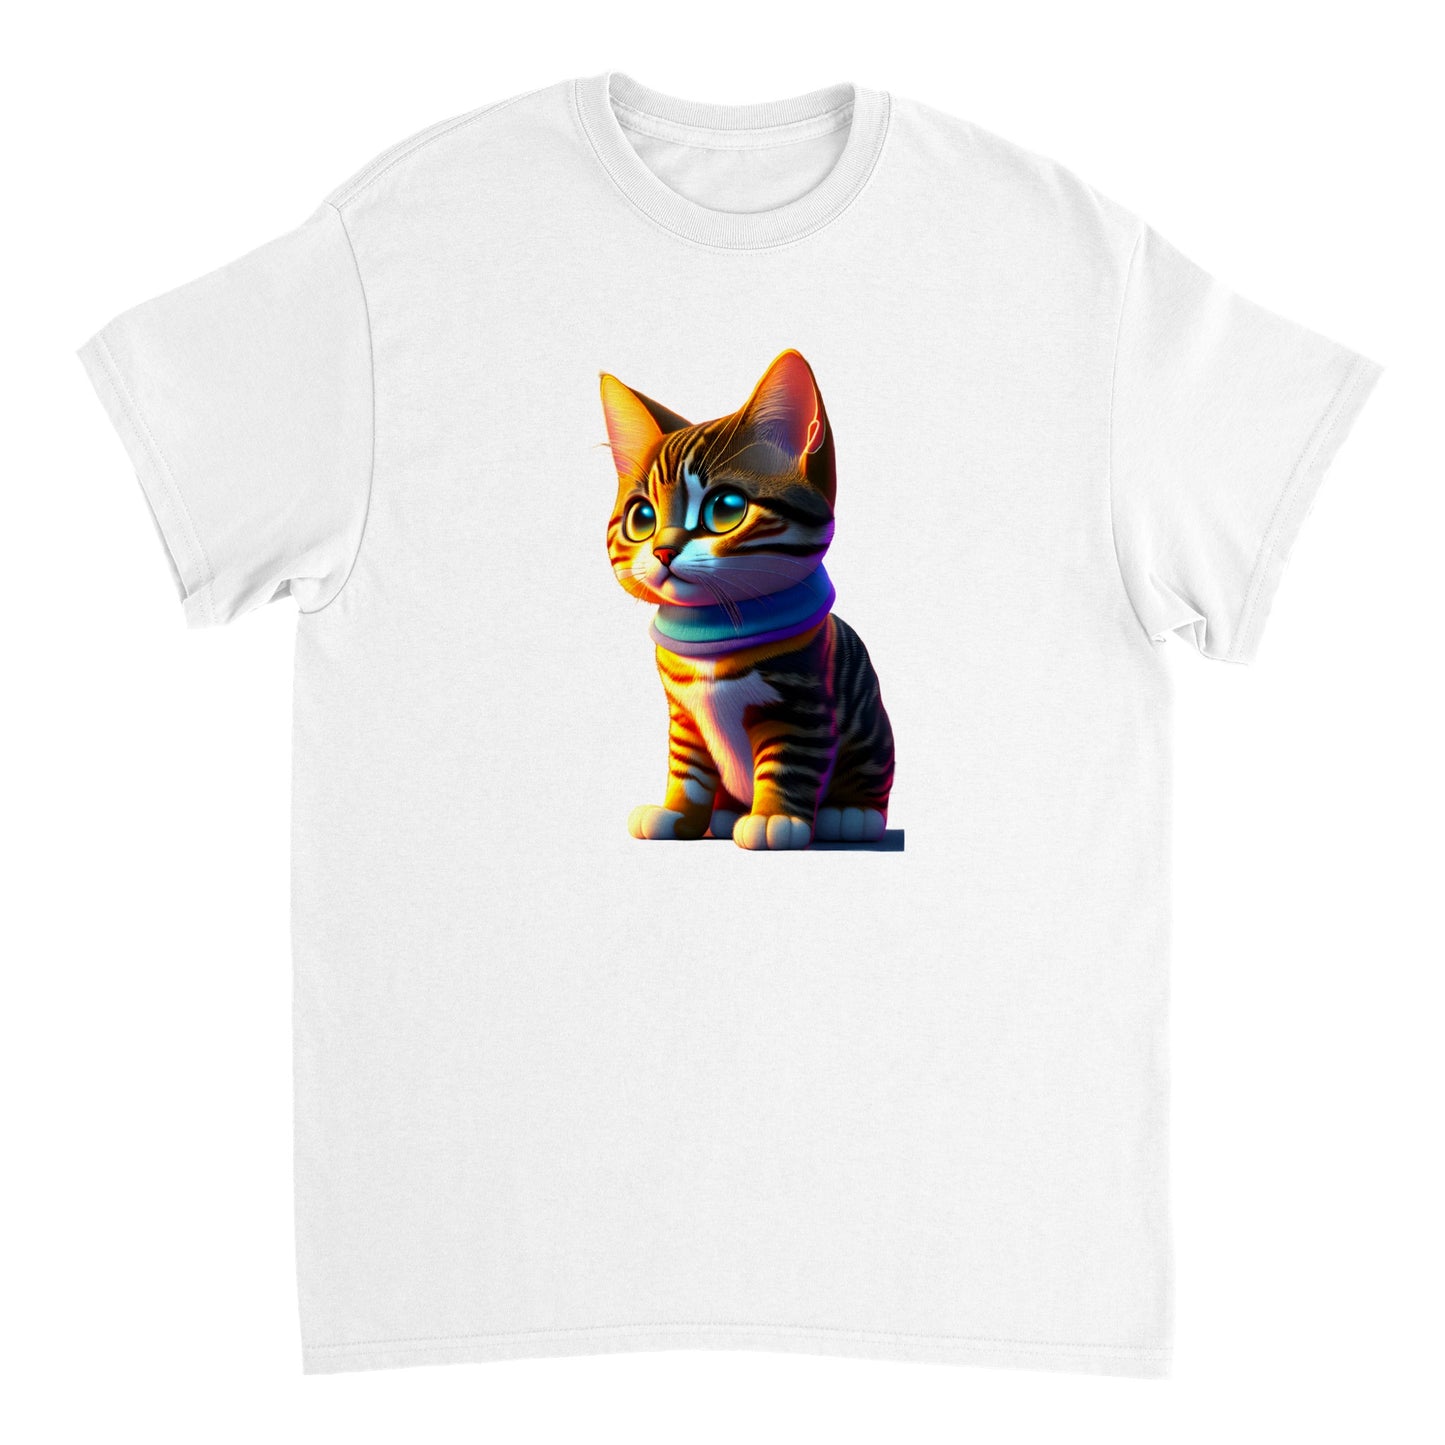 Adorable, Cool, Cute Cats and Kittens Toy - Heavyweight Unisex Crewneck T-shirt 32